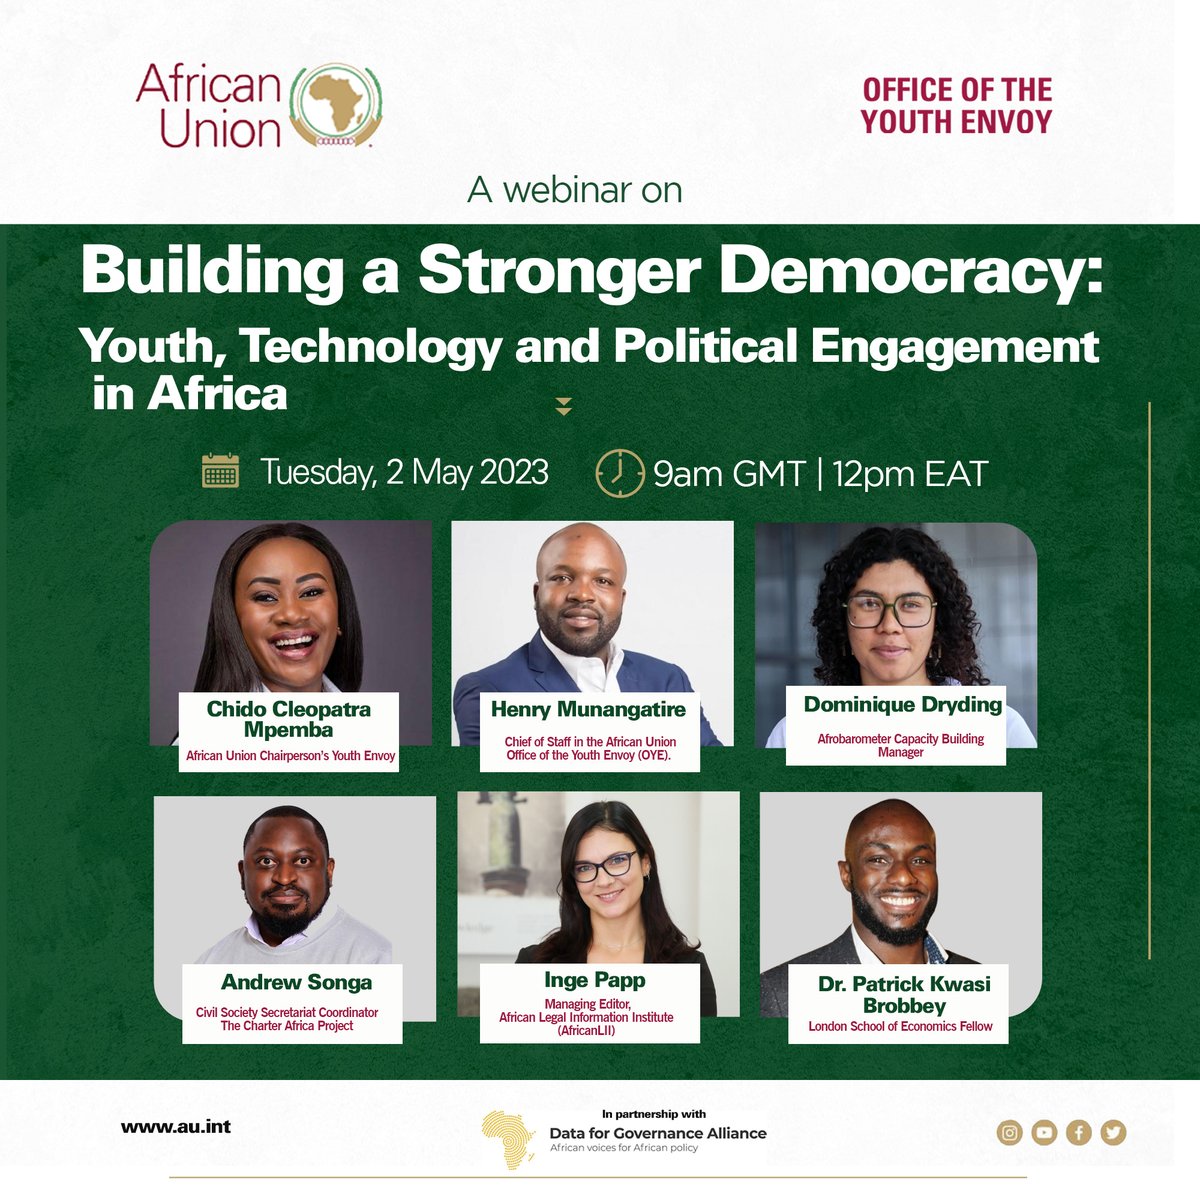 We’re excited to announce our distinguished speakers for the upcoming webinar on youth, technology and political participation in Africa.
Register here and join this insightful conversation: bitly.ws/DBKk
#Tech4Gov